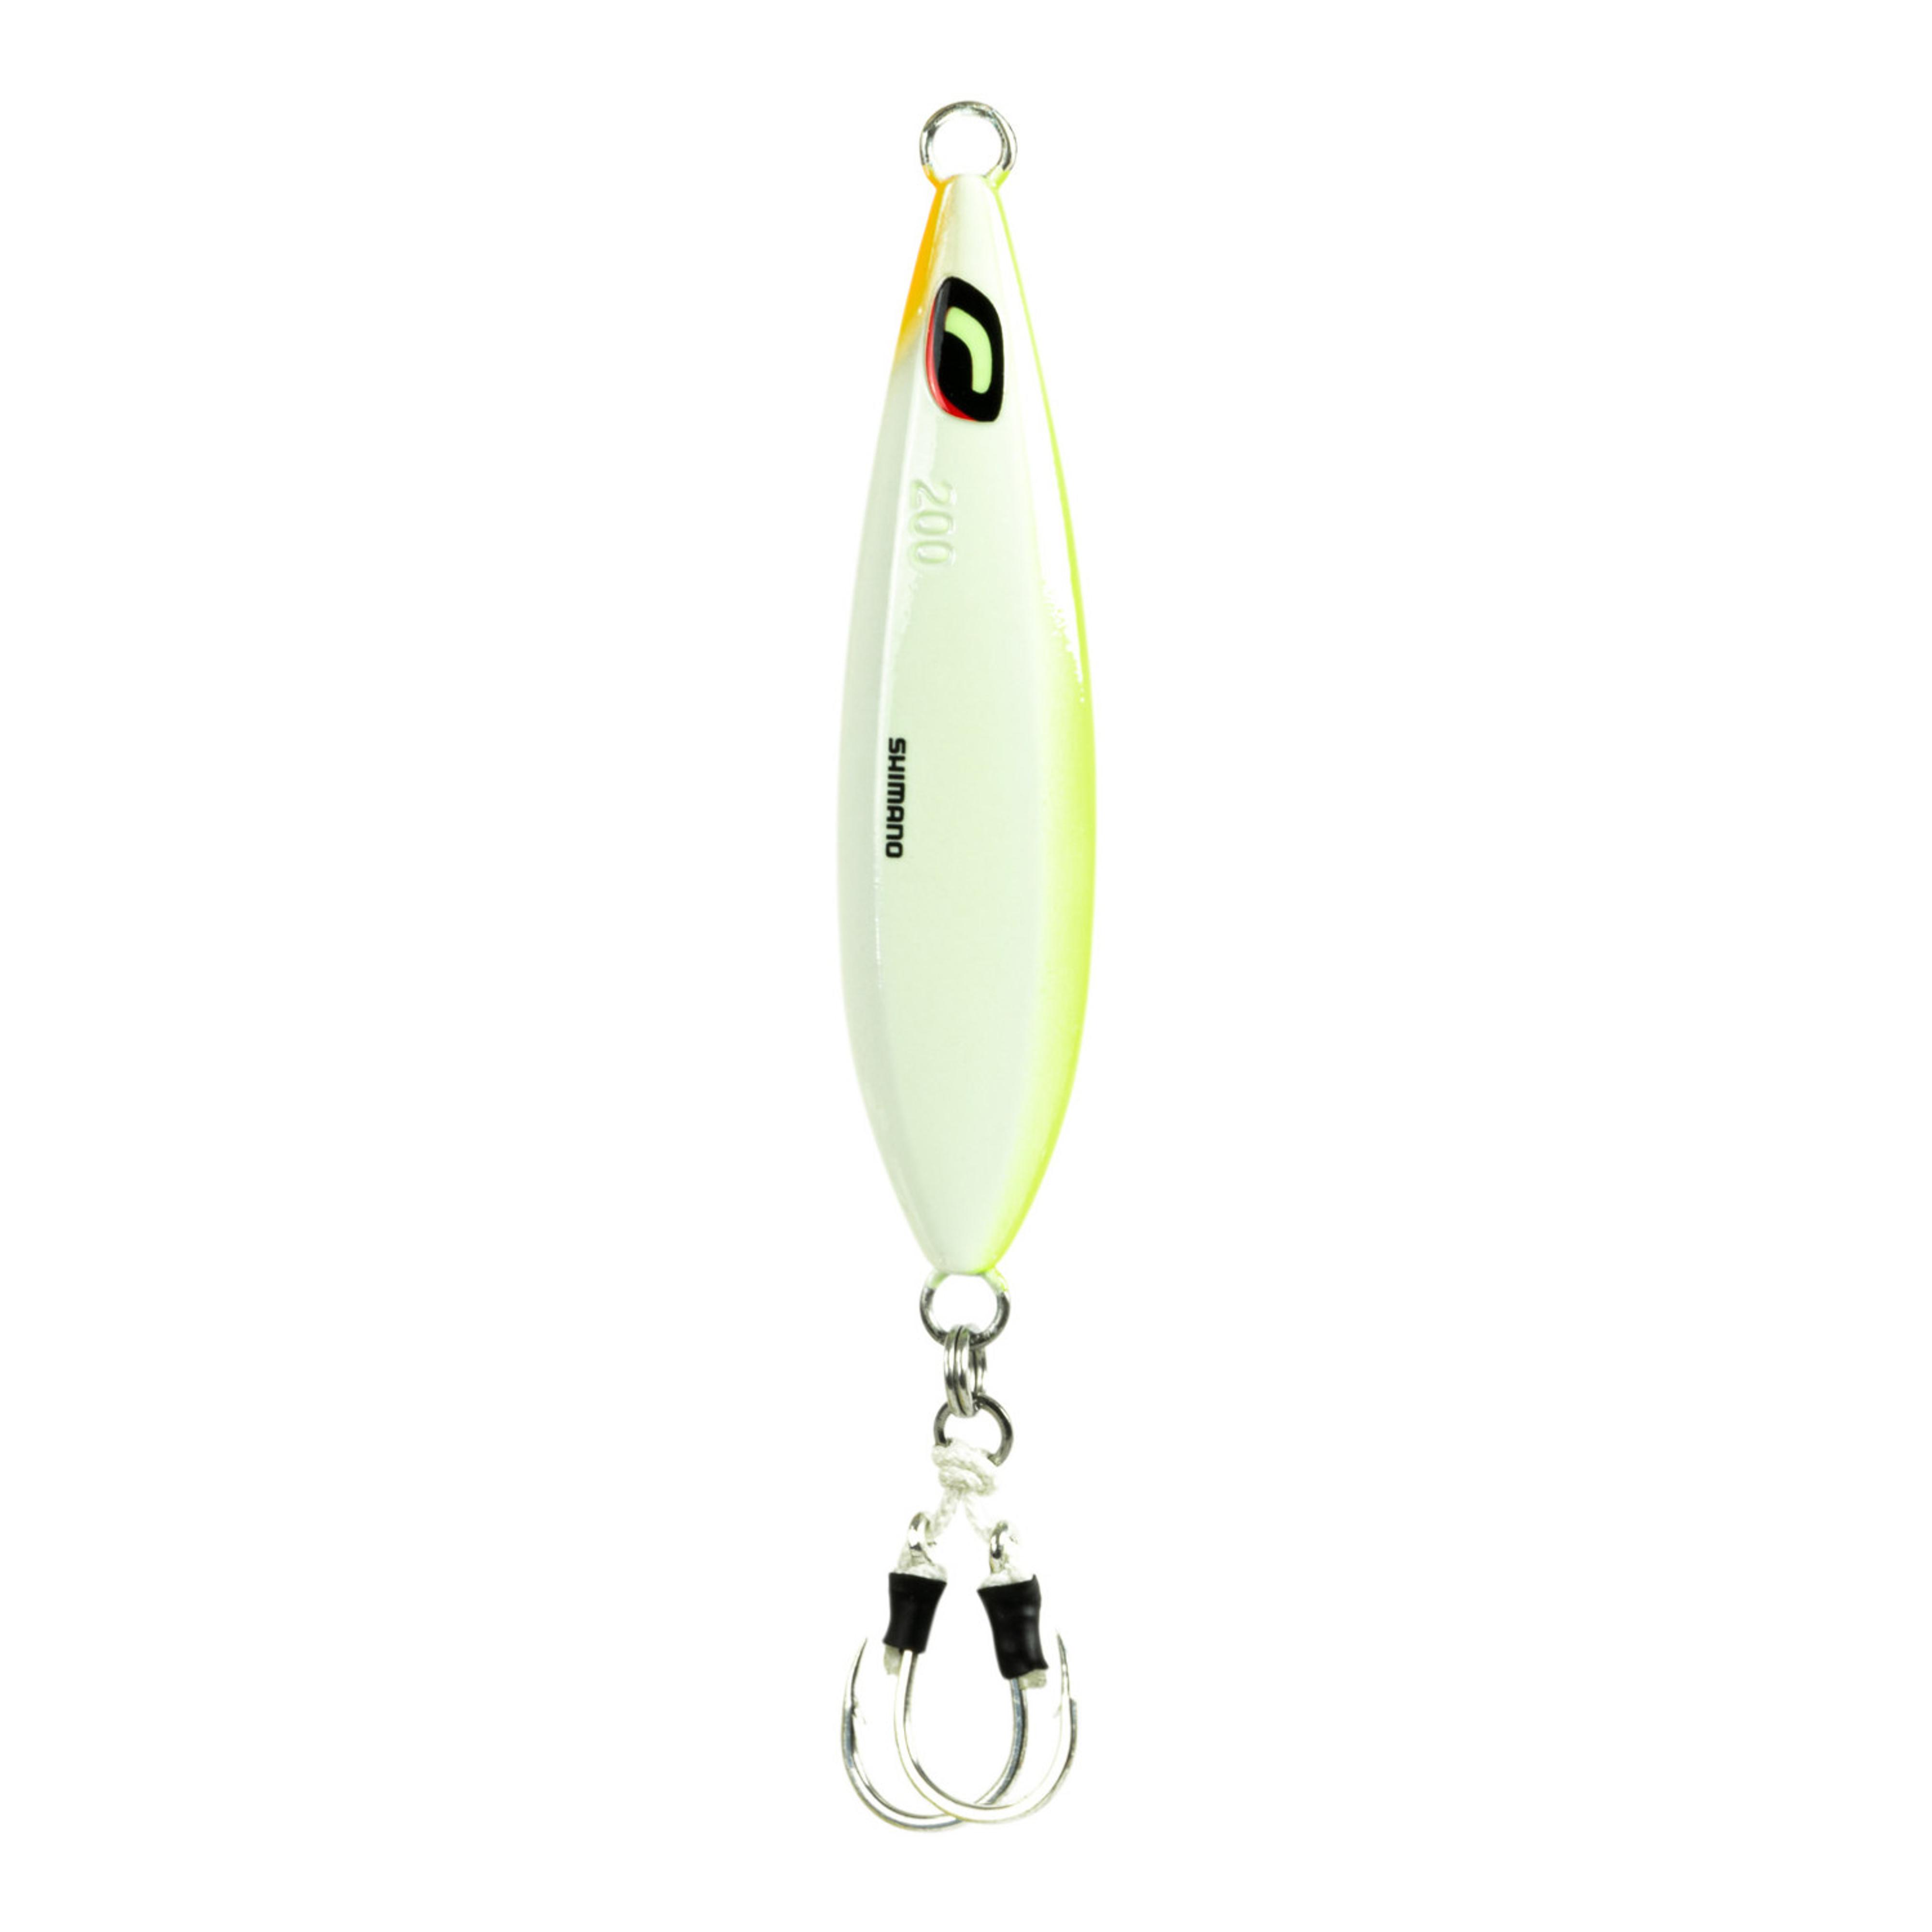 Twich Bait - Shimano - Shimano Coltsniper Twitch Bait 80F Floating Jig Red White